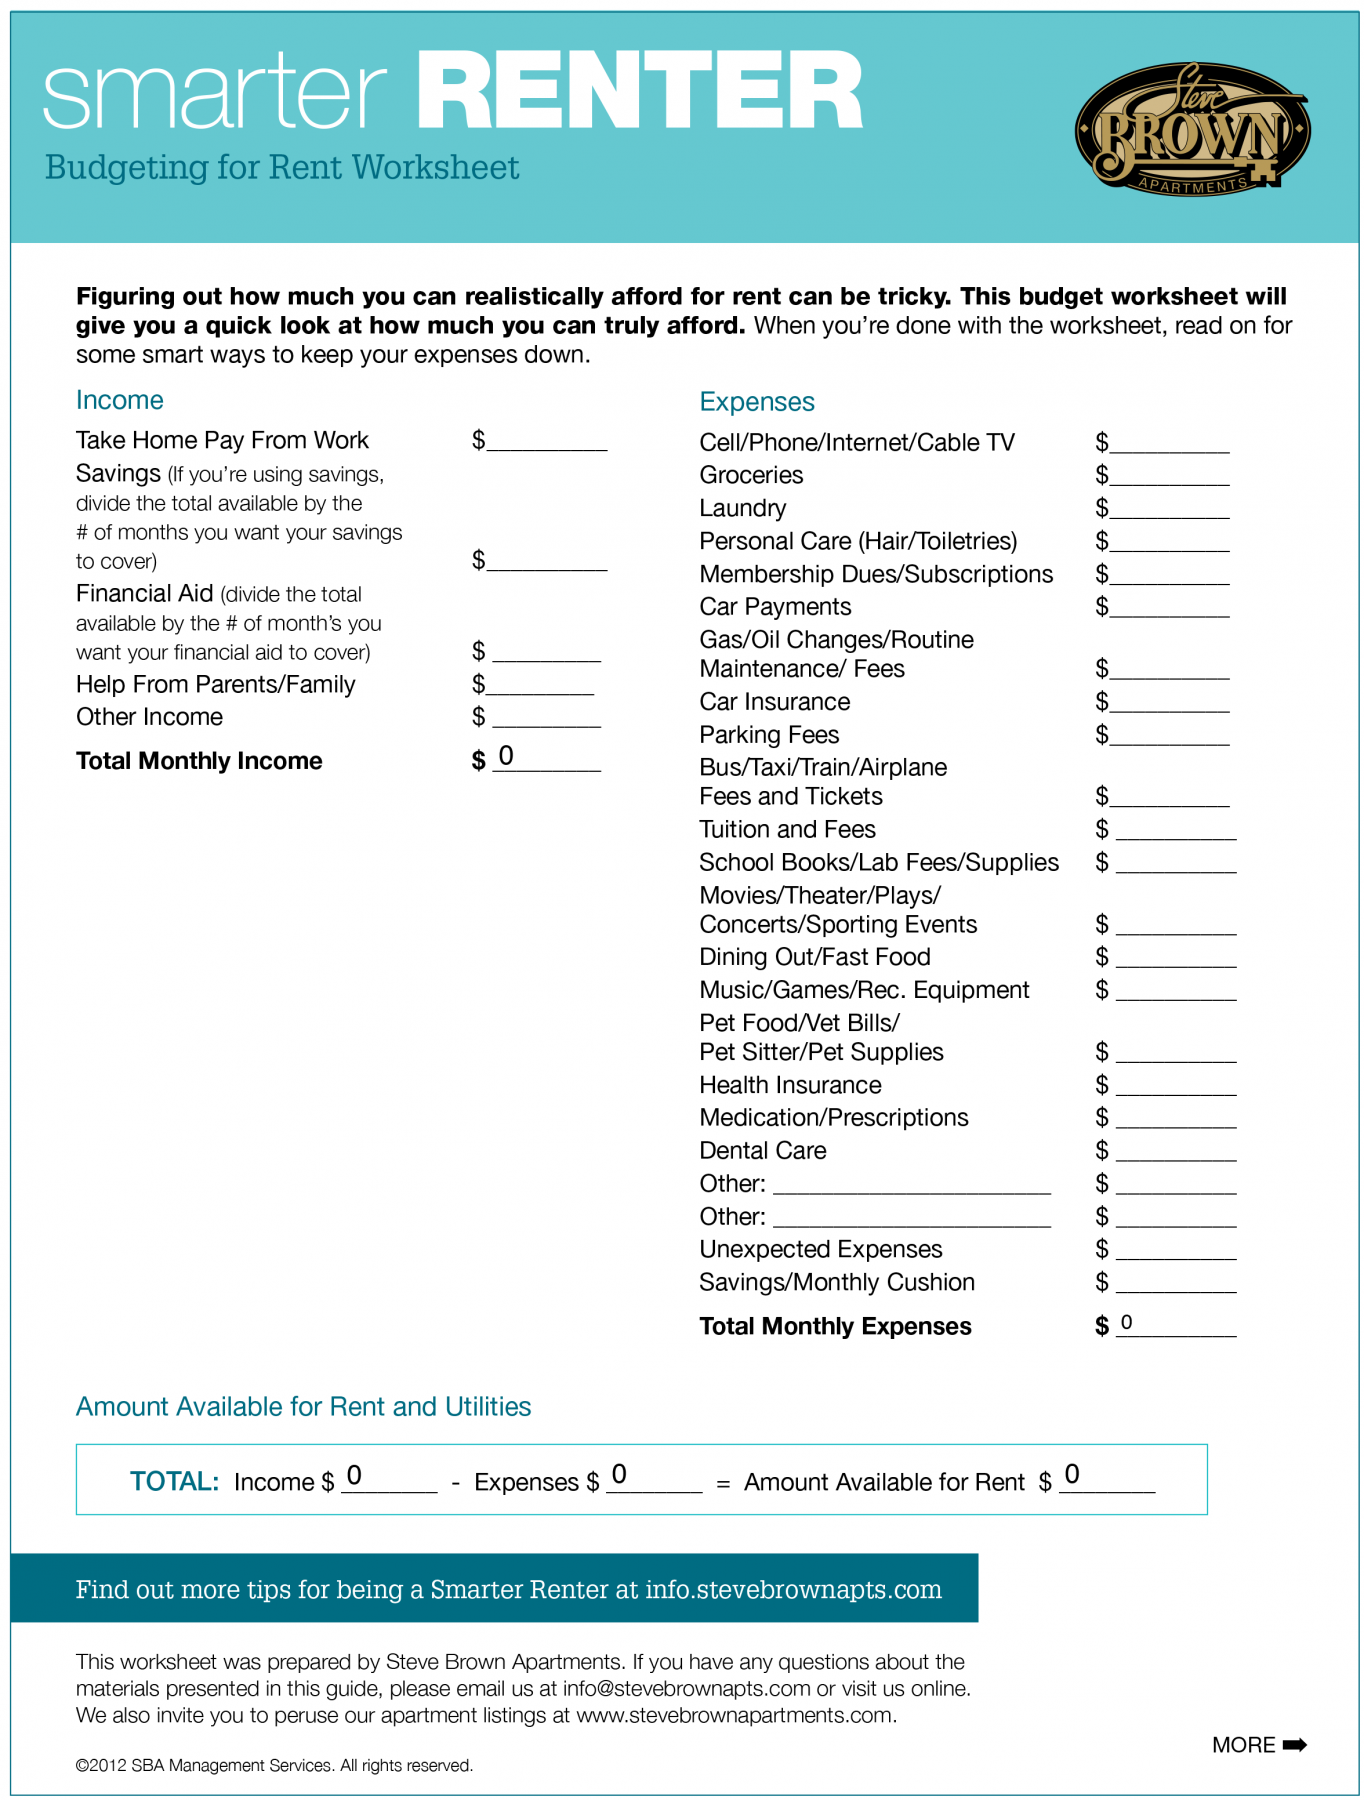 Download Our Budgeting For Rent Worksheet Steve Brown Apartments